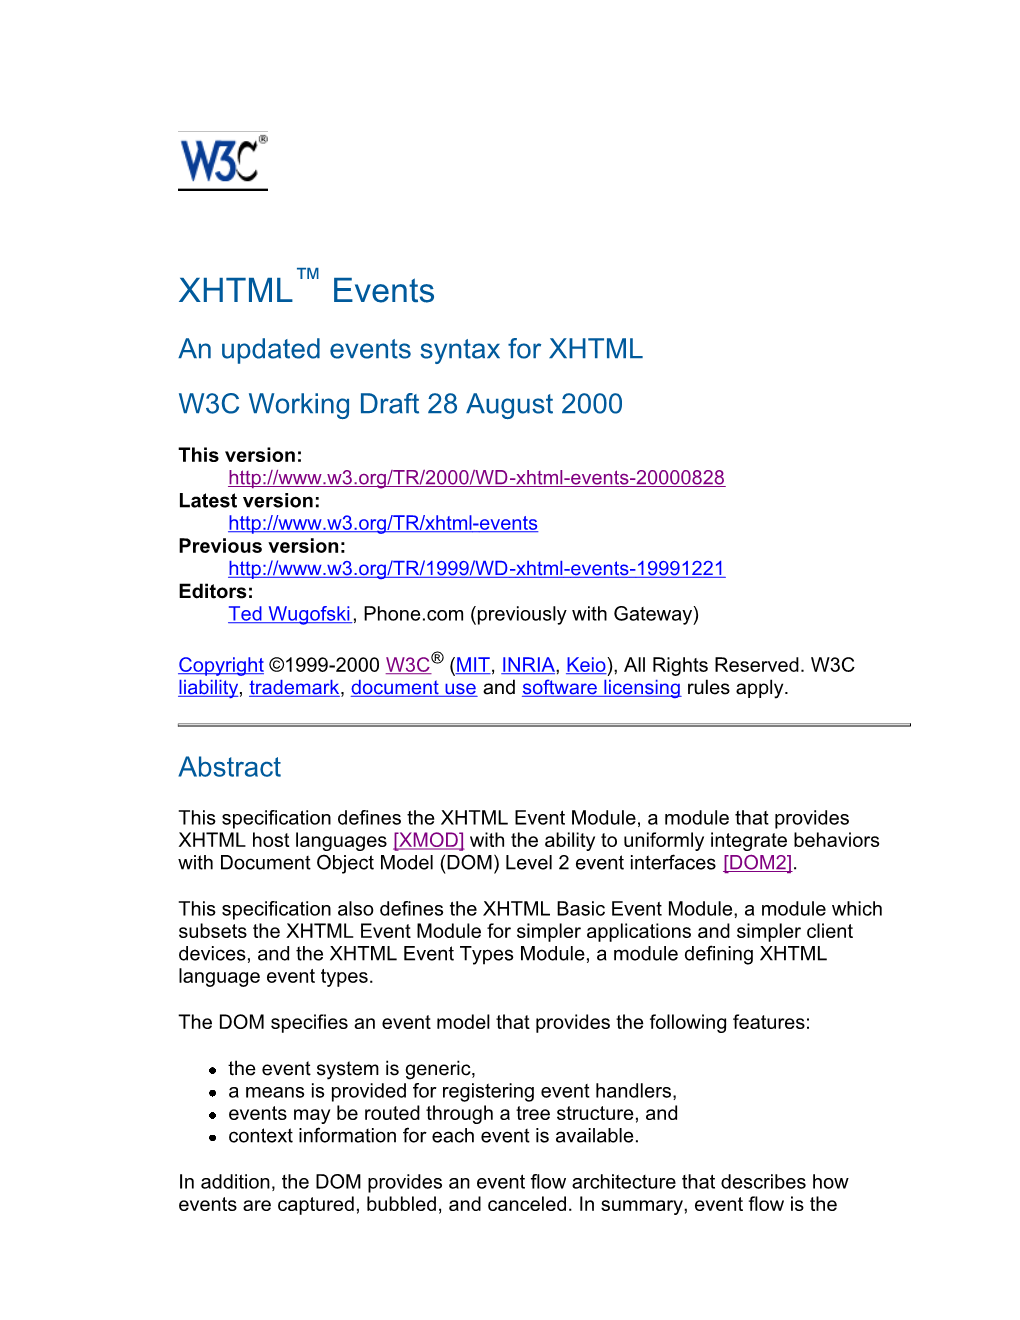 W3C XHTML Events